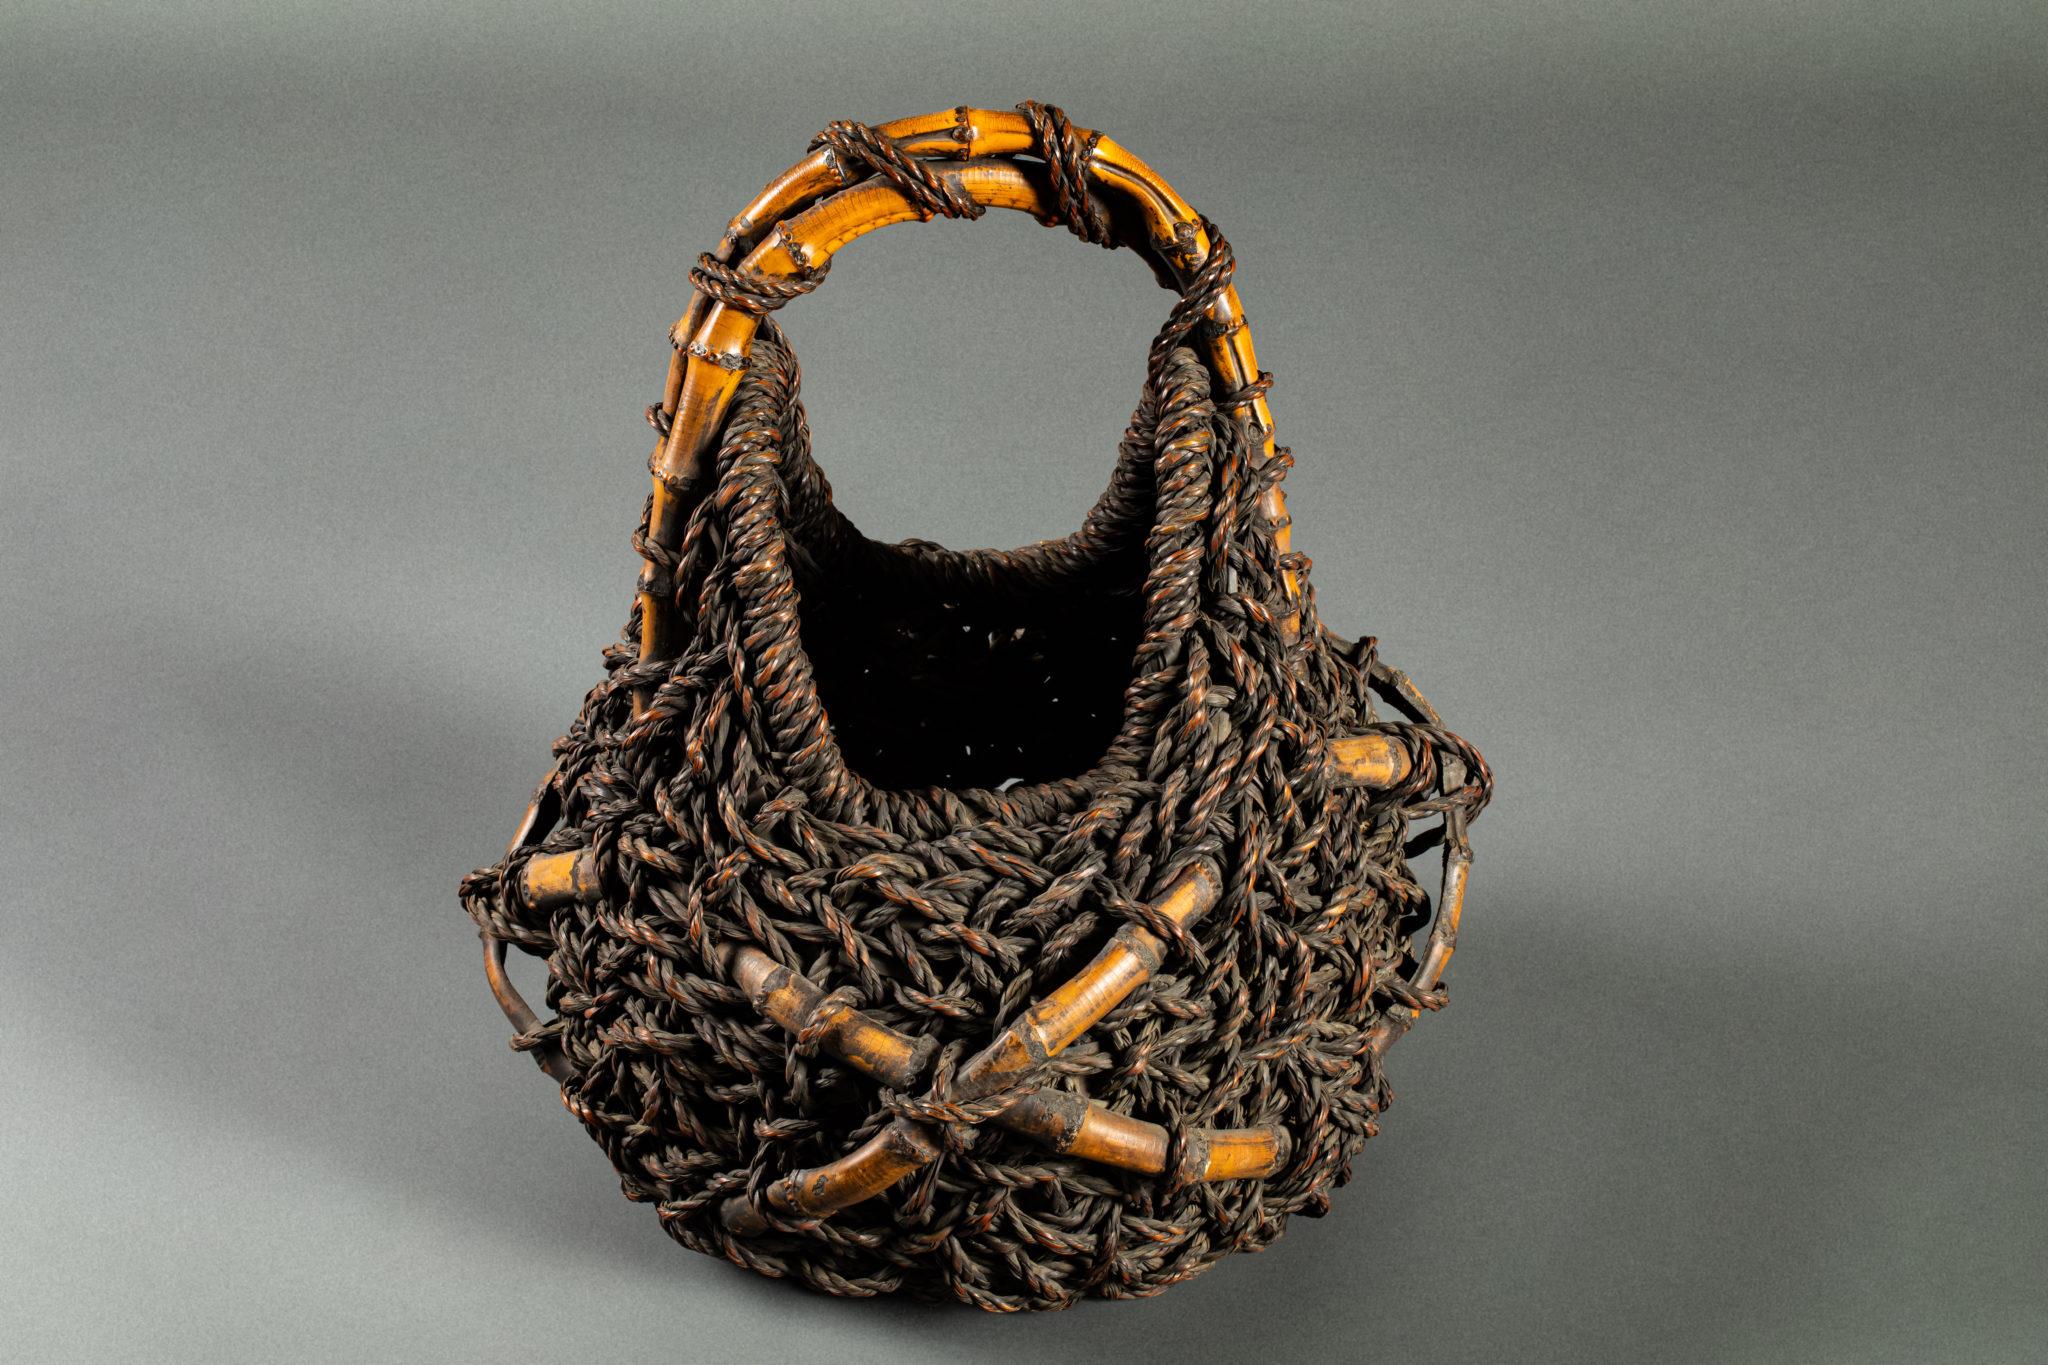 Bamboo construction with twisted rope design. Artist signature reads: Chikubi-Sai (opening measures: 6 1/4